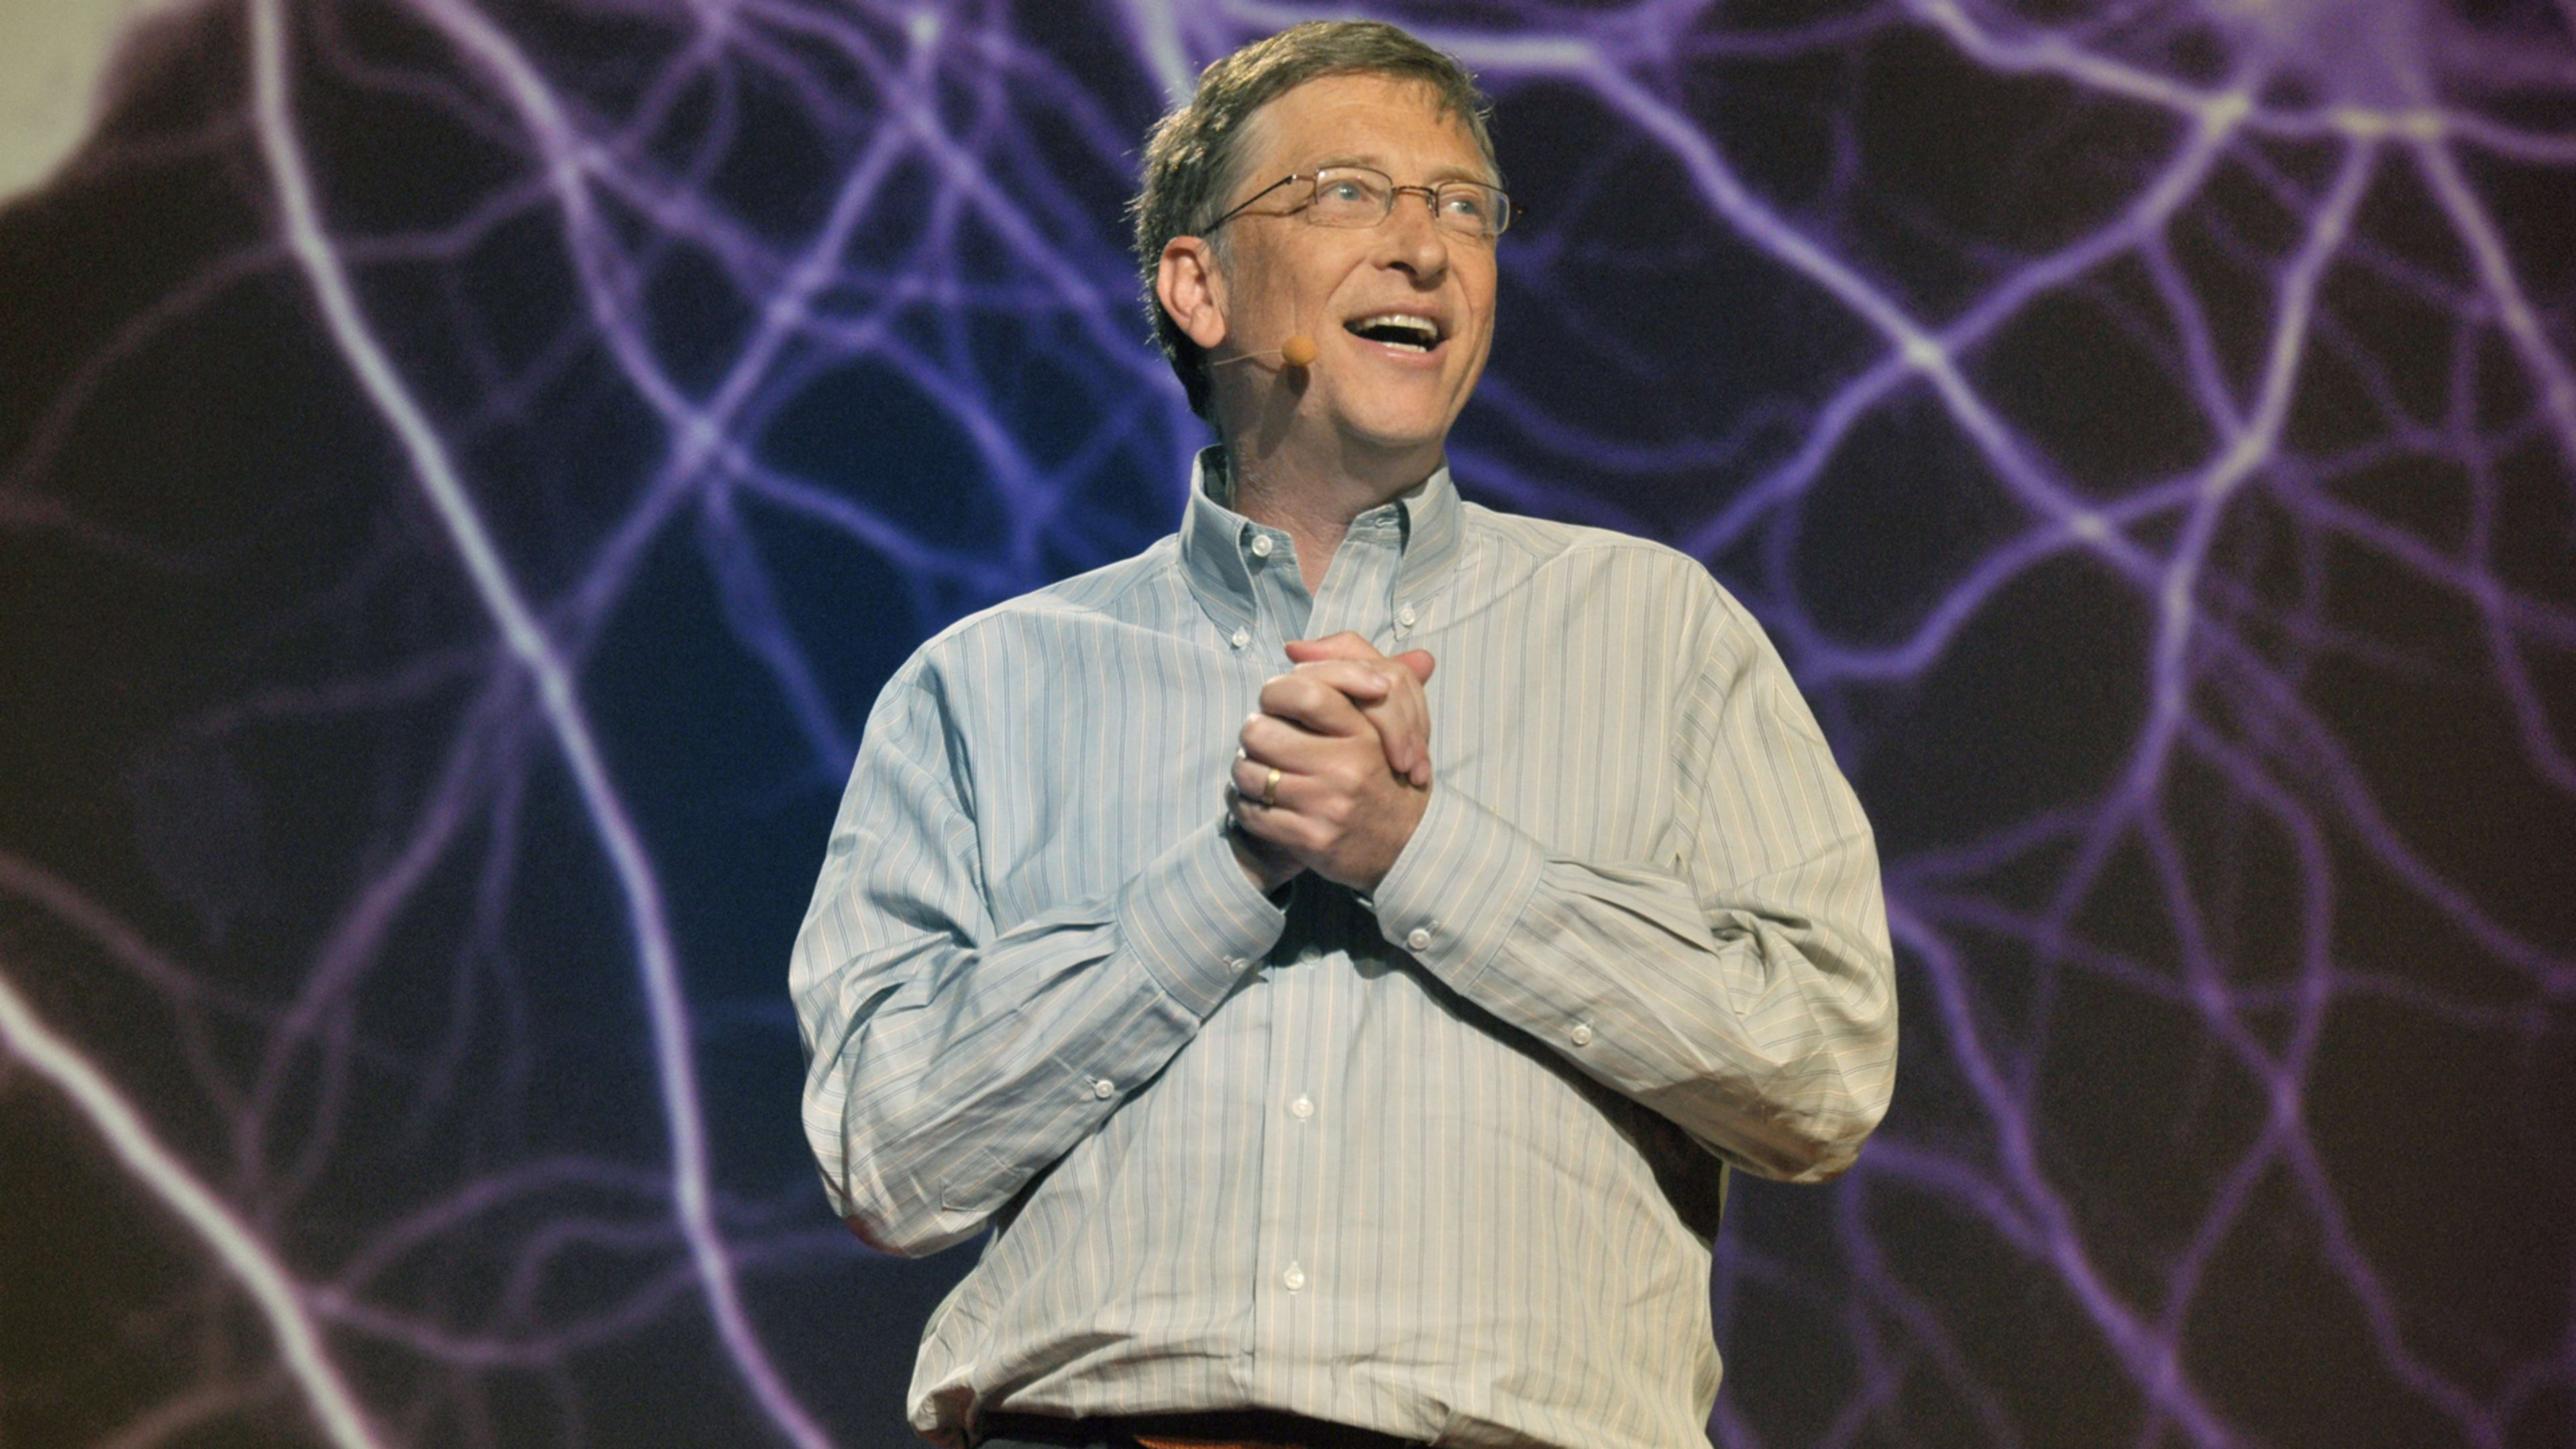 Bill Gates just gave the keynote at a toilet expo